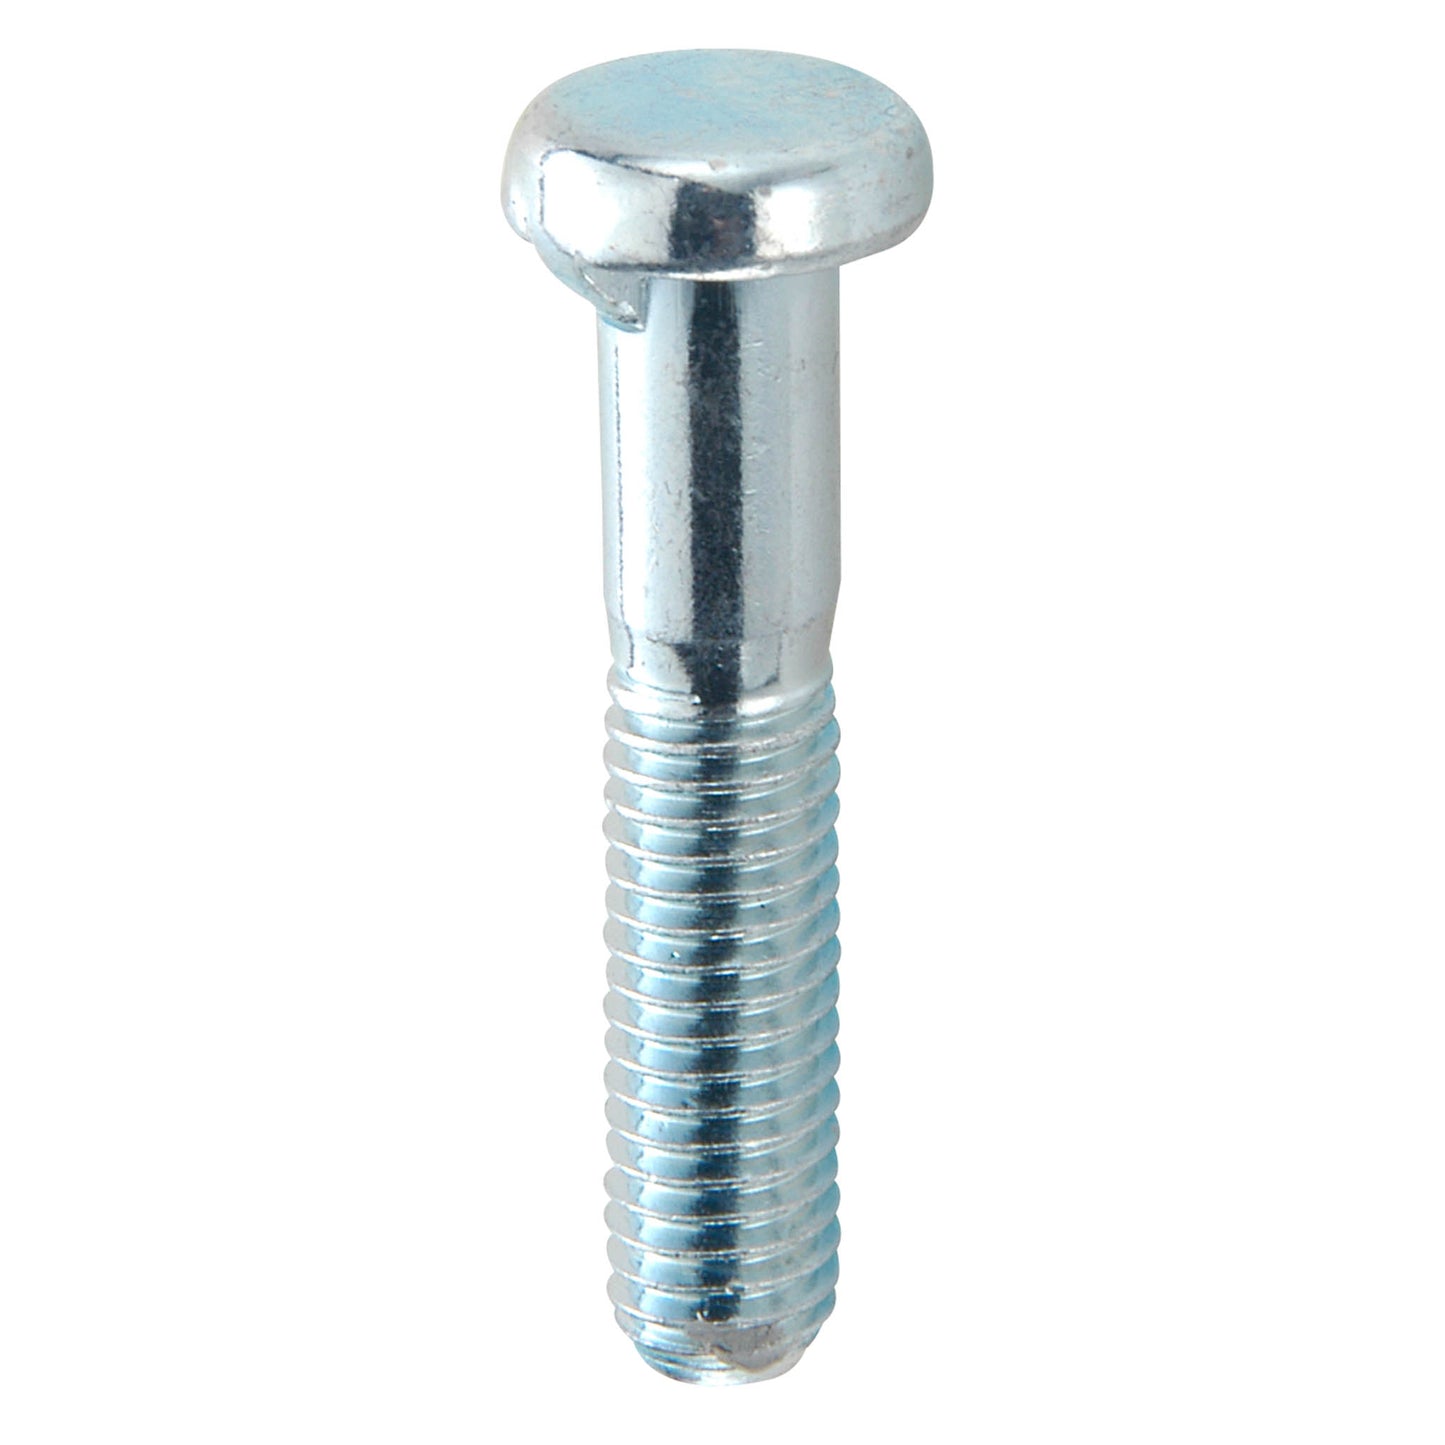 Handlebar and seat post clamping bolt M 8 x 40, galvanized steel